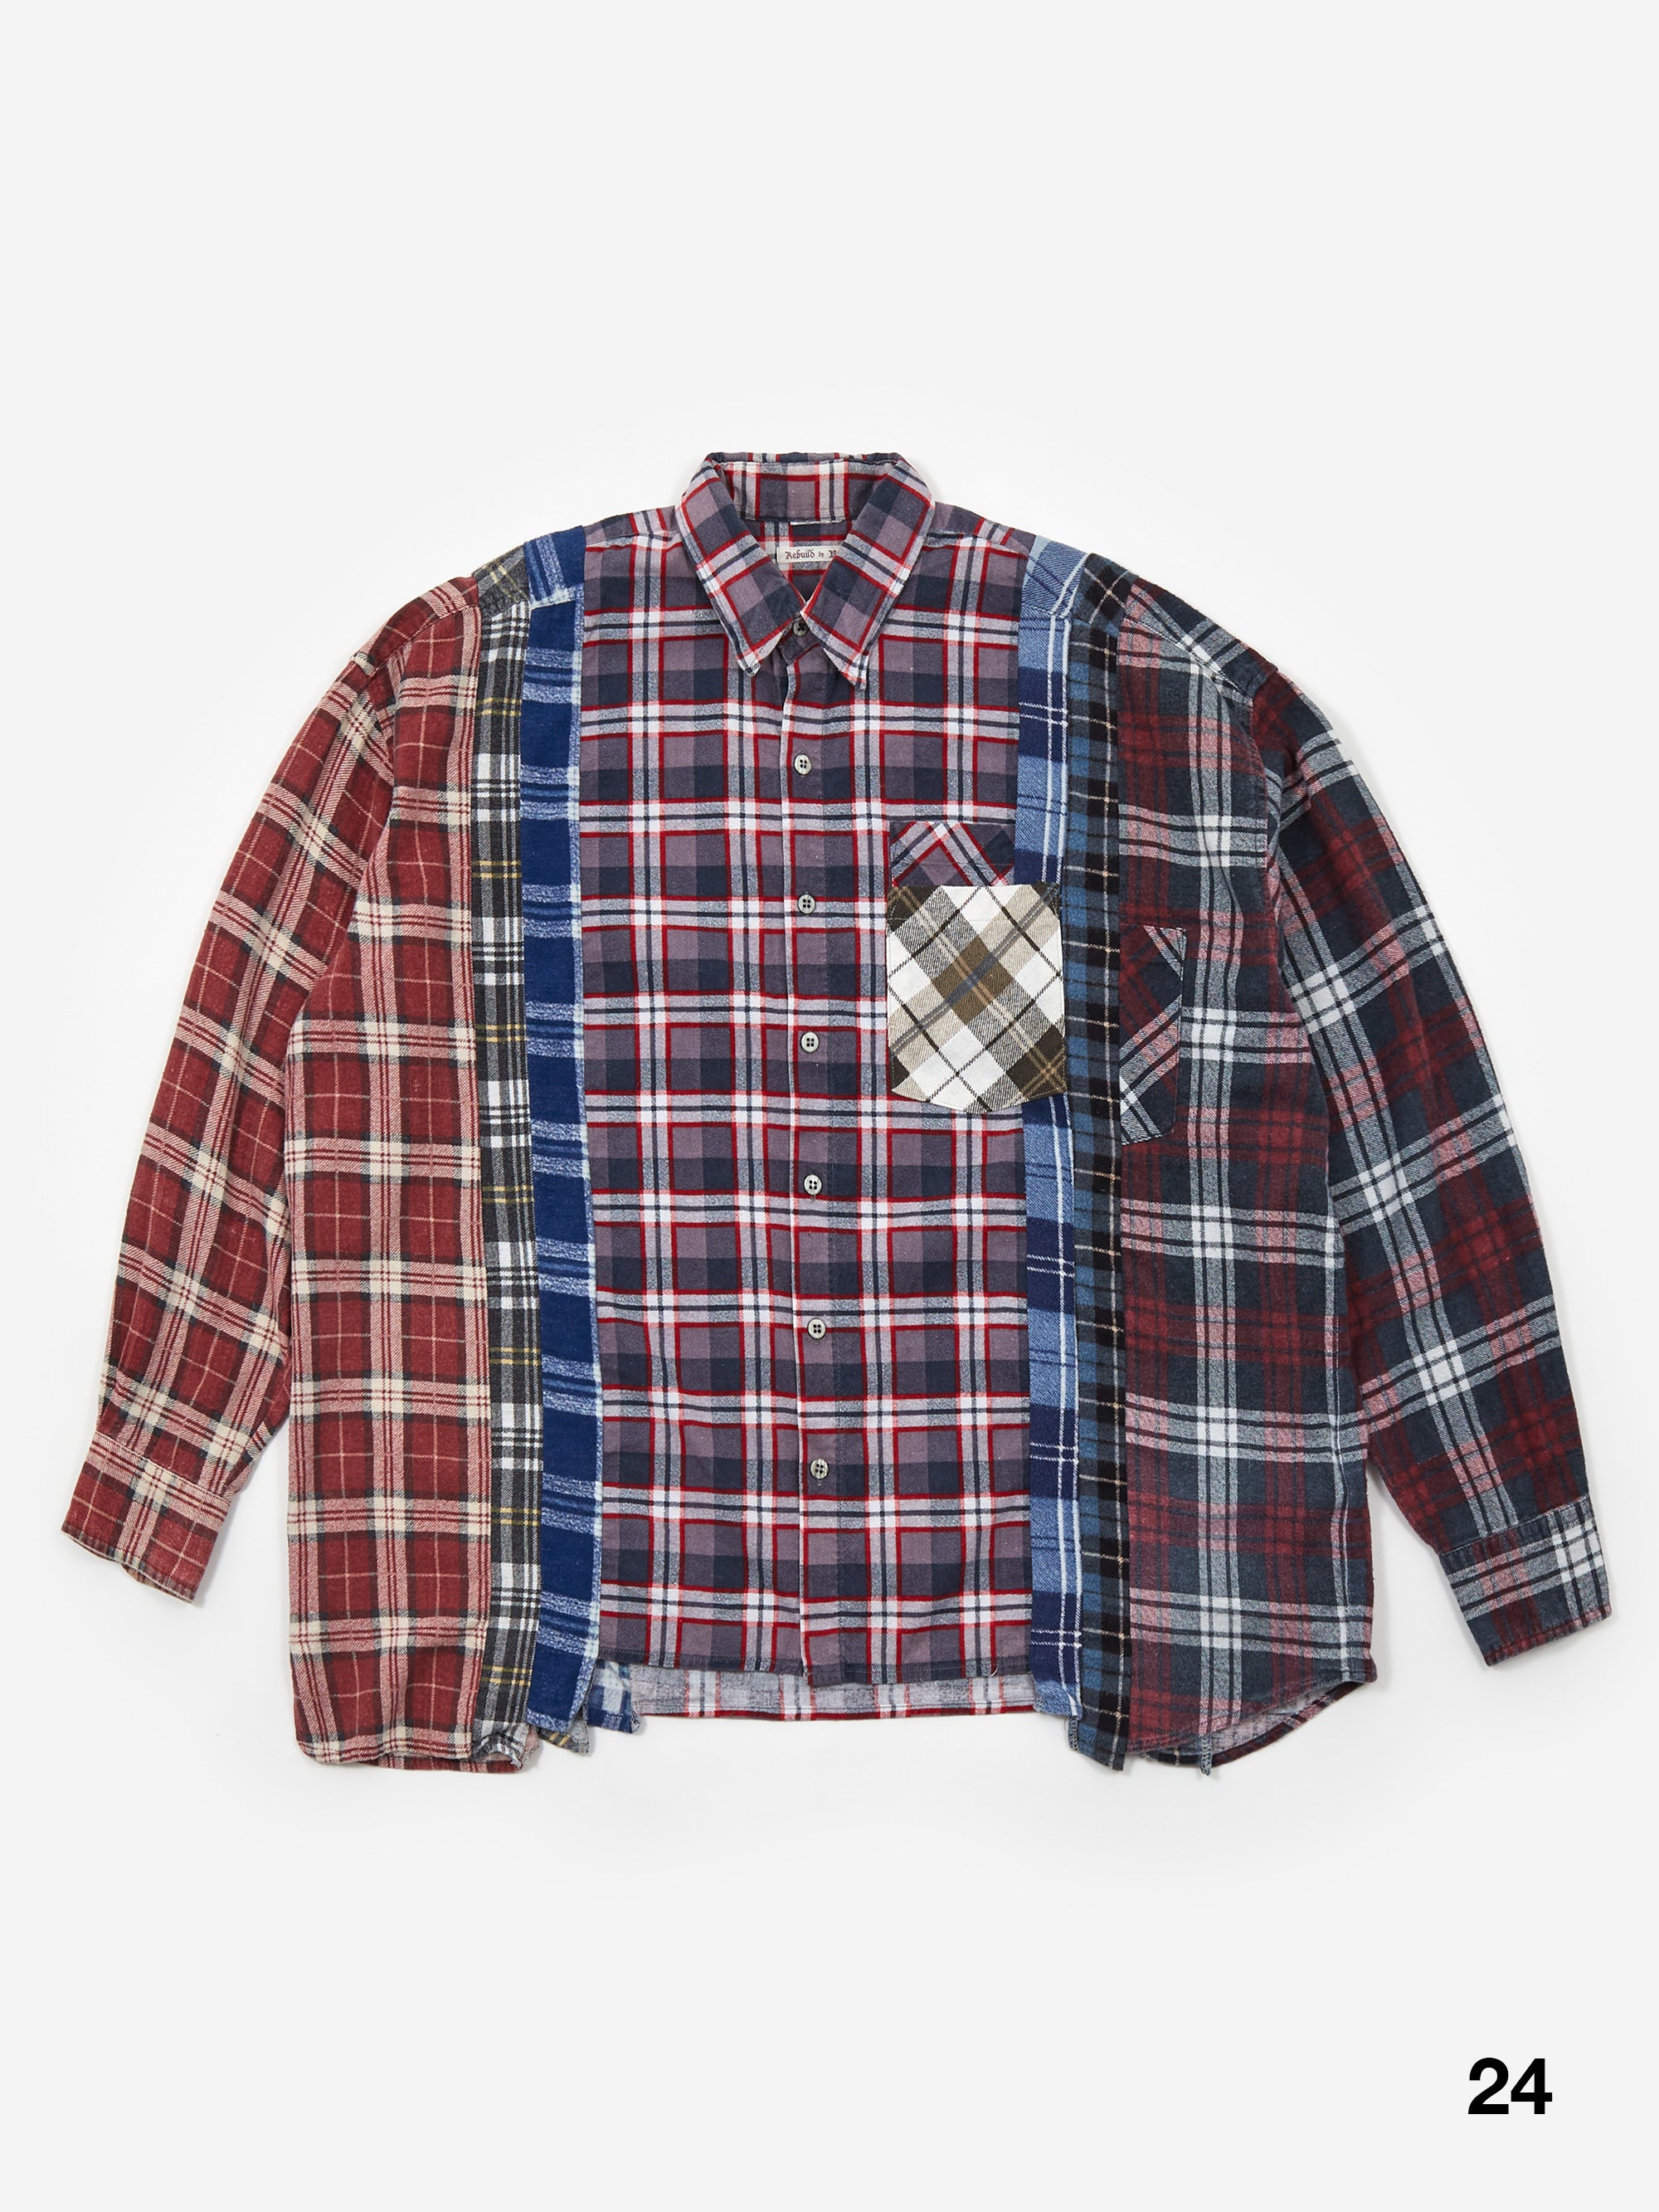 Needles Rebuild 7 Cuts Flannel Shirt / Wide - Assorted